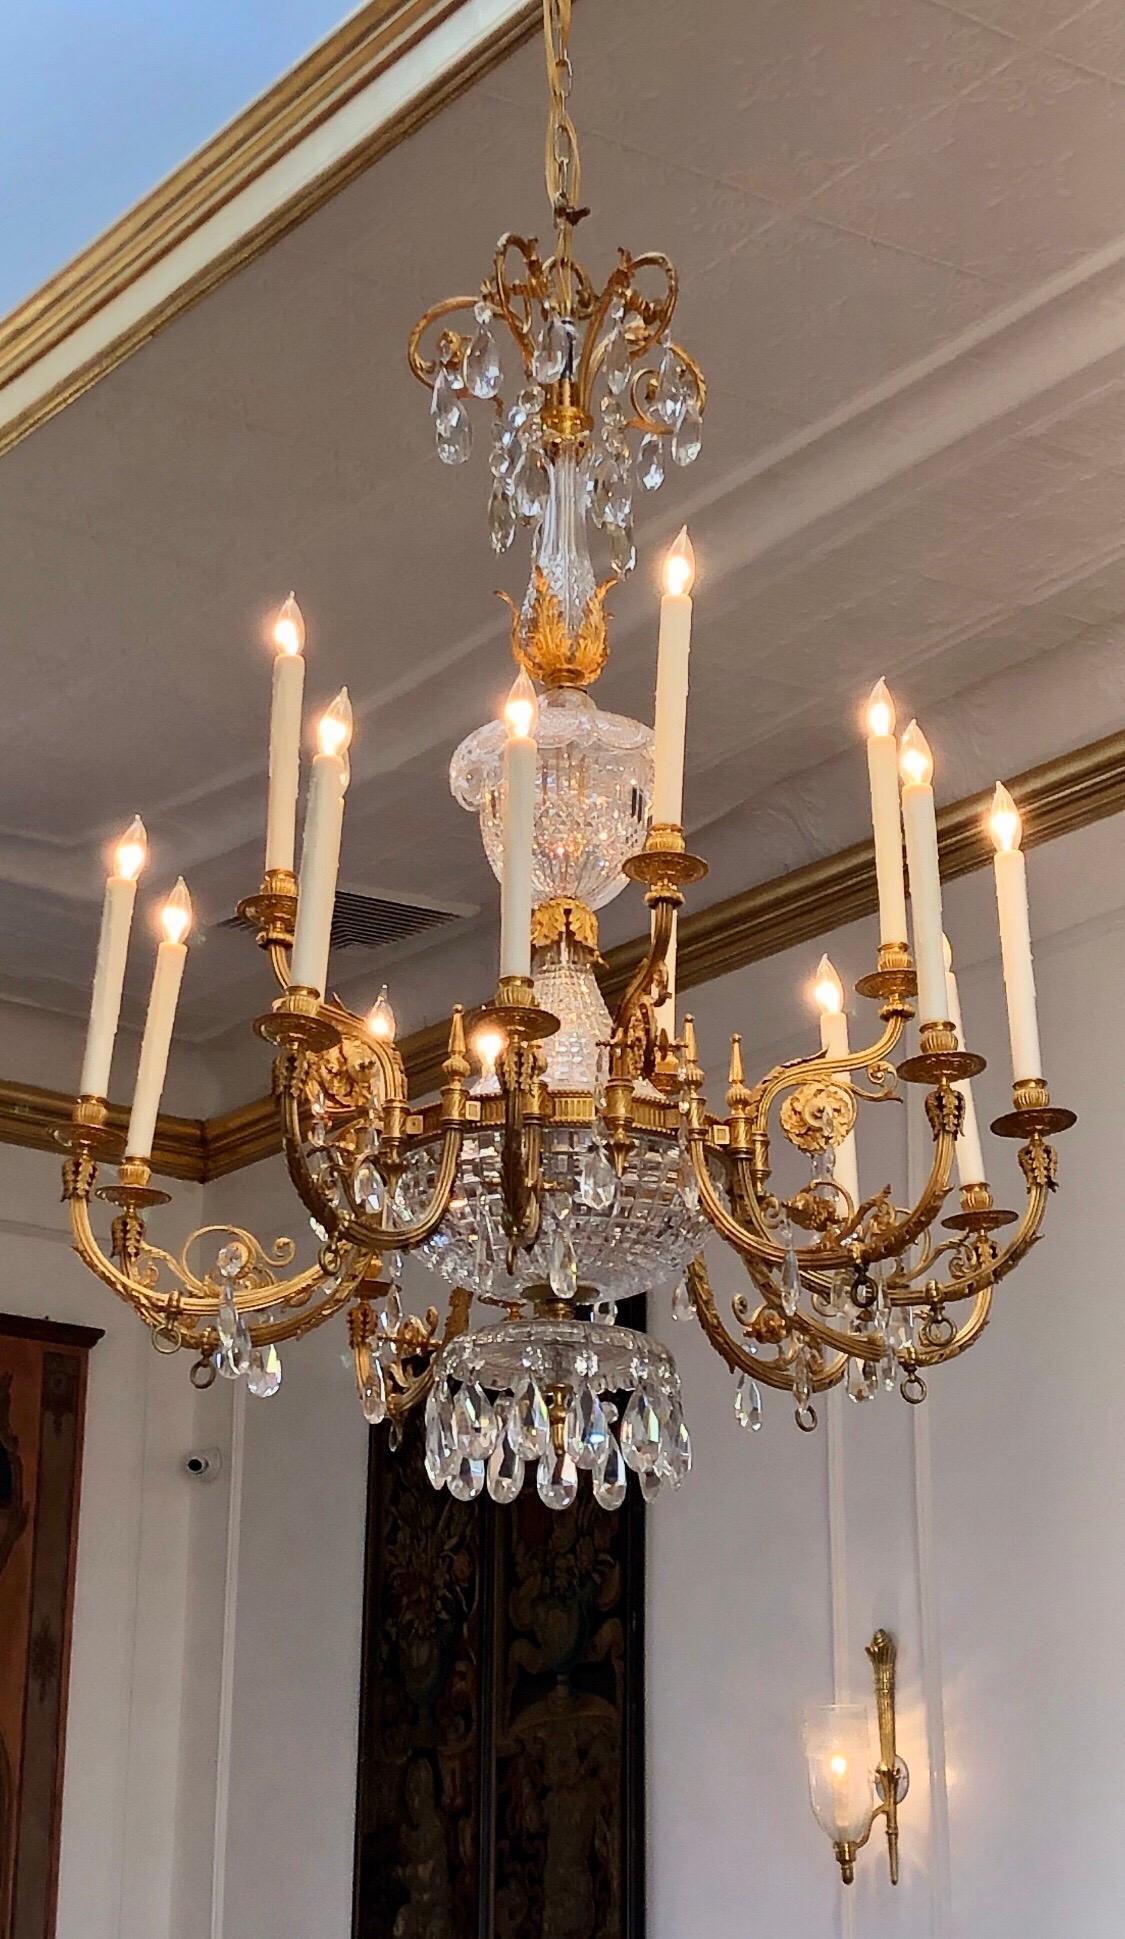 Monumental English Regency Gasolier has bronze doré gas arms with individual gas cocks on each arm. The chandelier has an hand-cut Irish crystal center stem in basket and vase form. The bronze doré & crystal chandelier is exquisitely decorated with